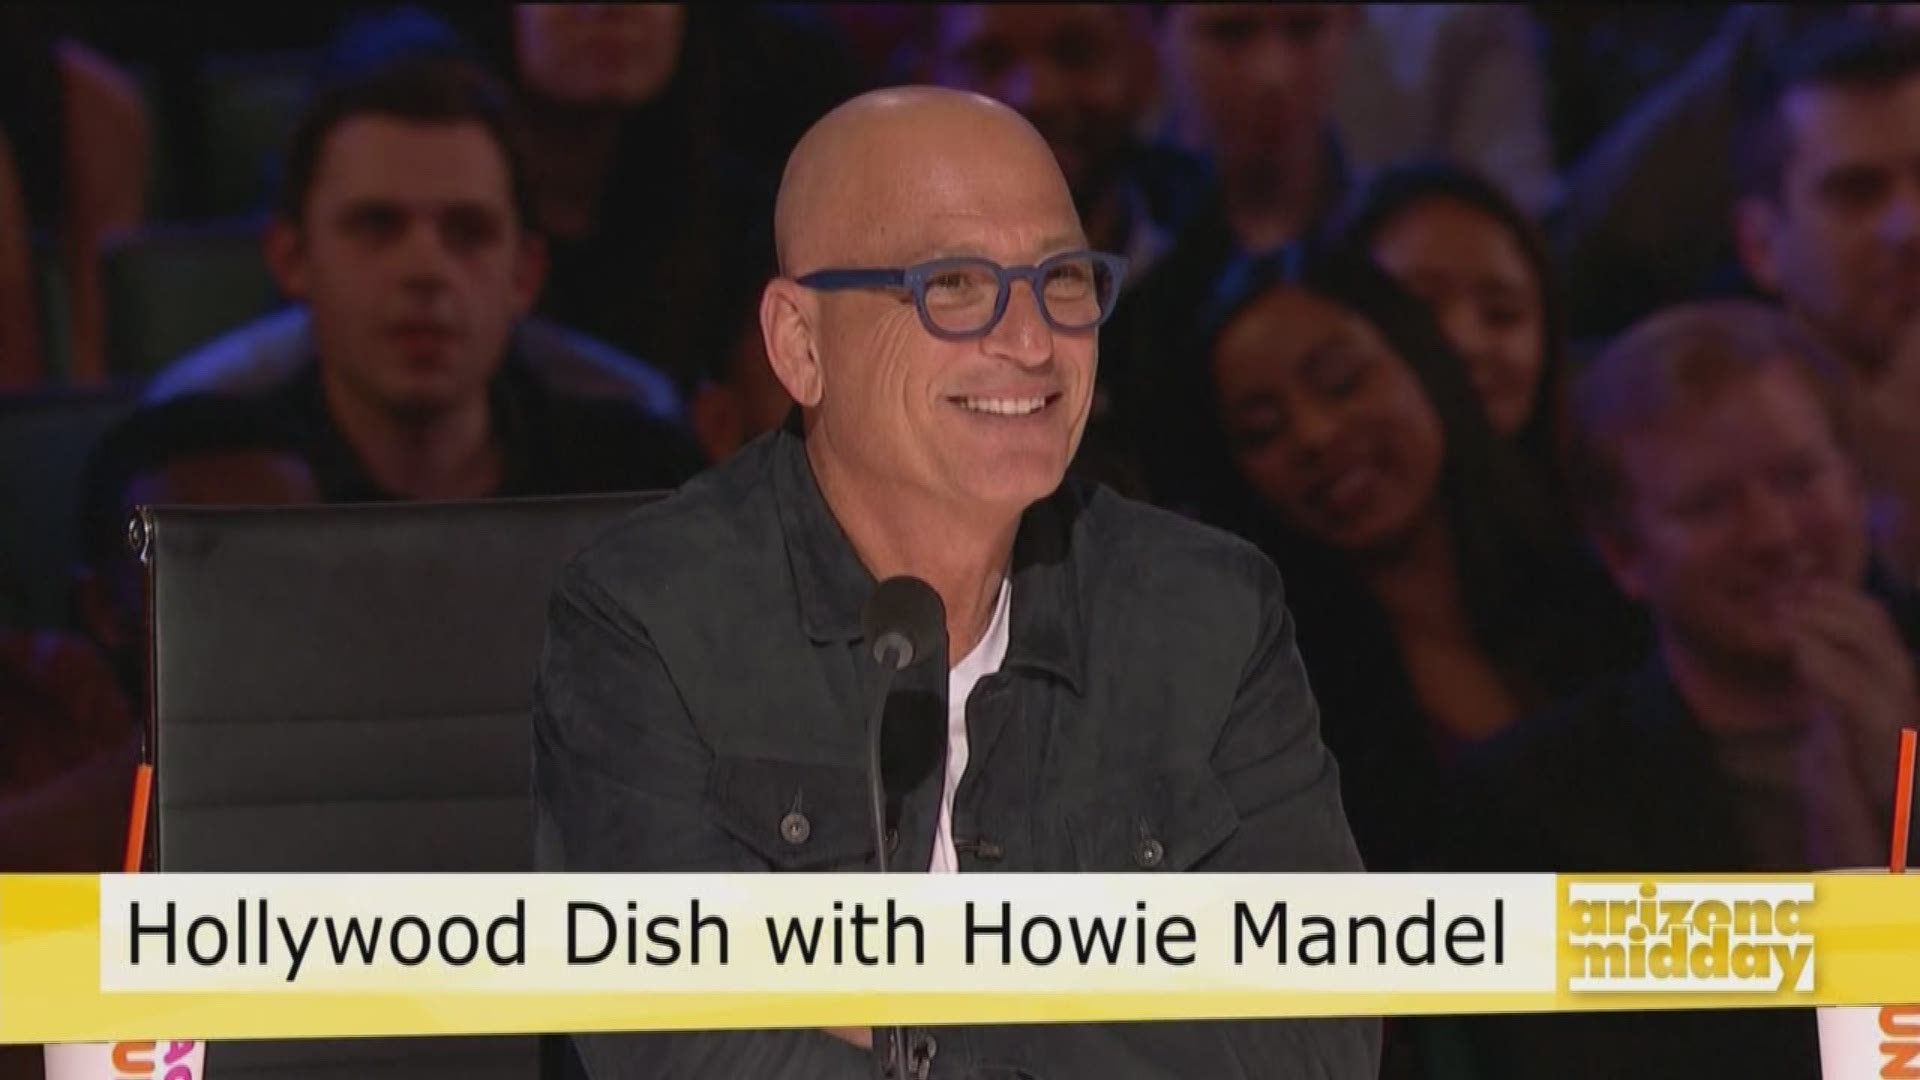 Howie Mandel joins us to talk about the new season of America's Got Talent and his "Take Cholesterol to Heart" health campaign